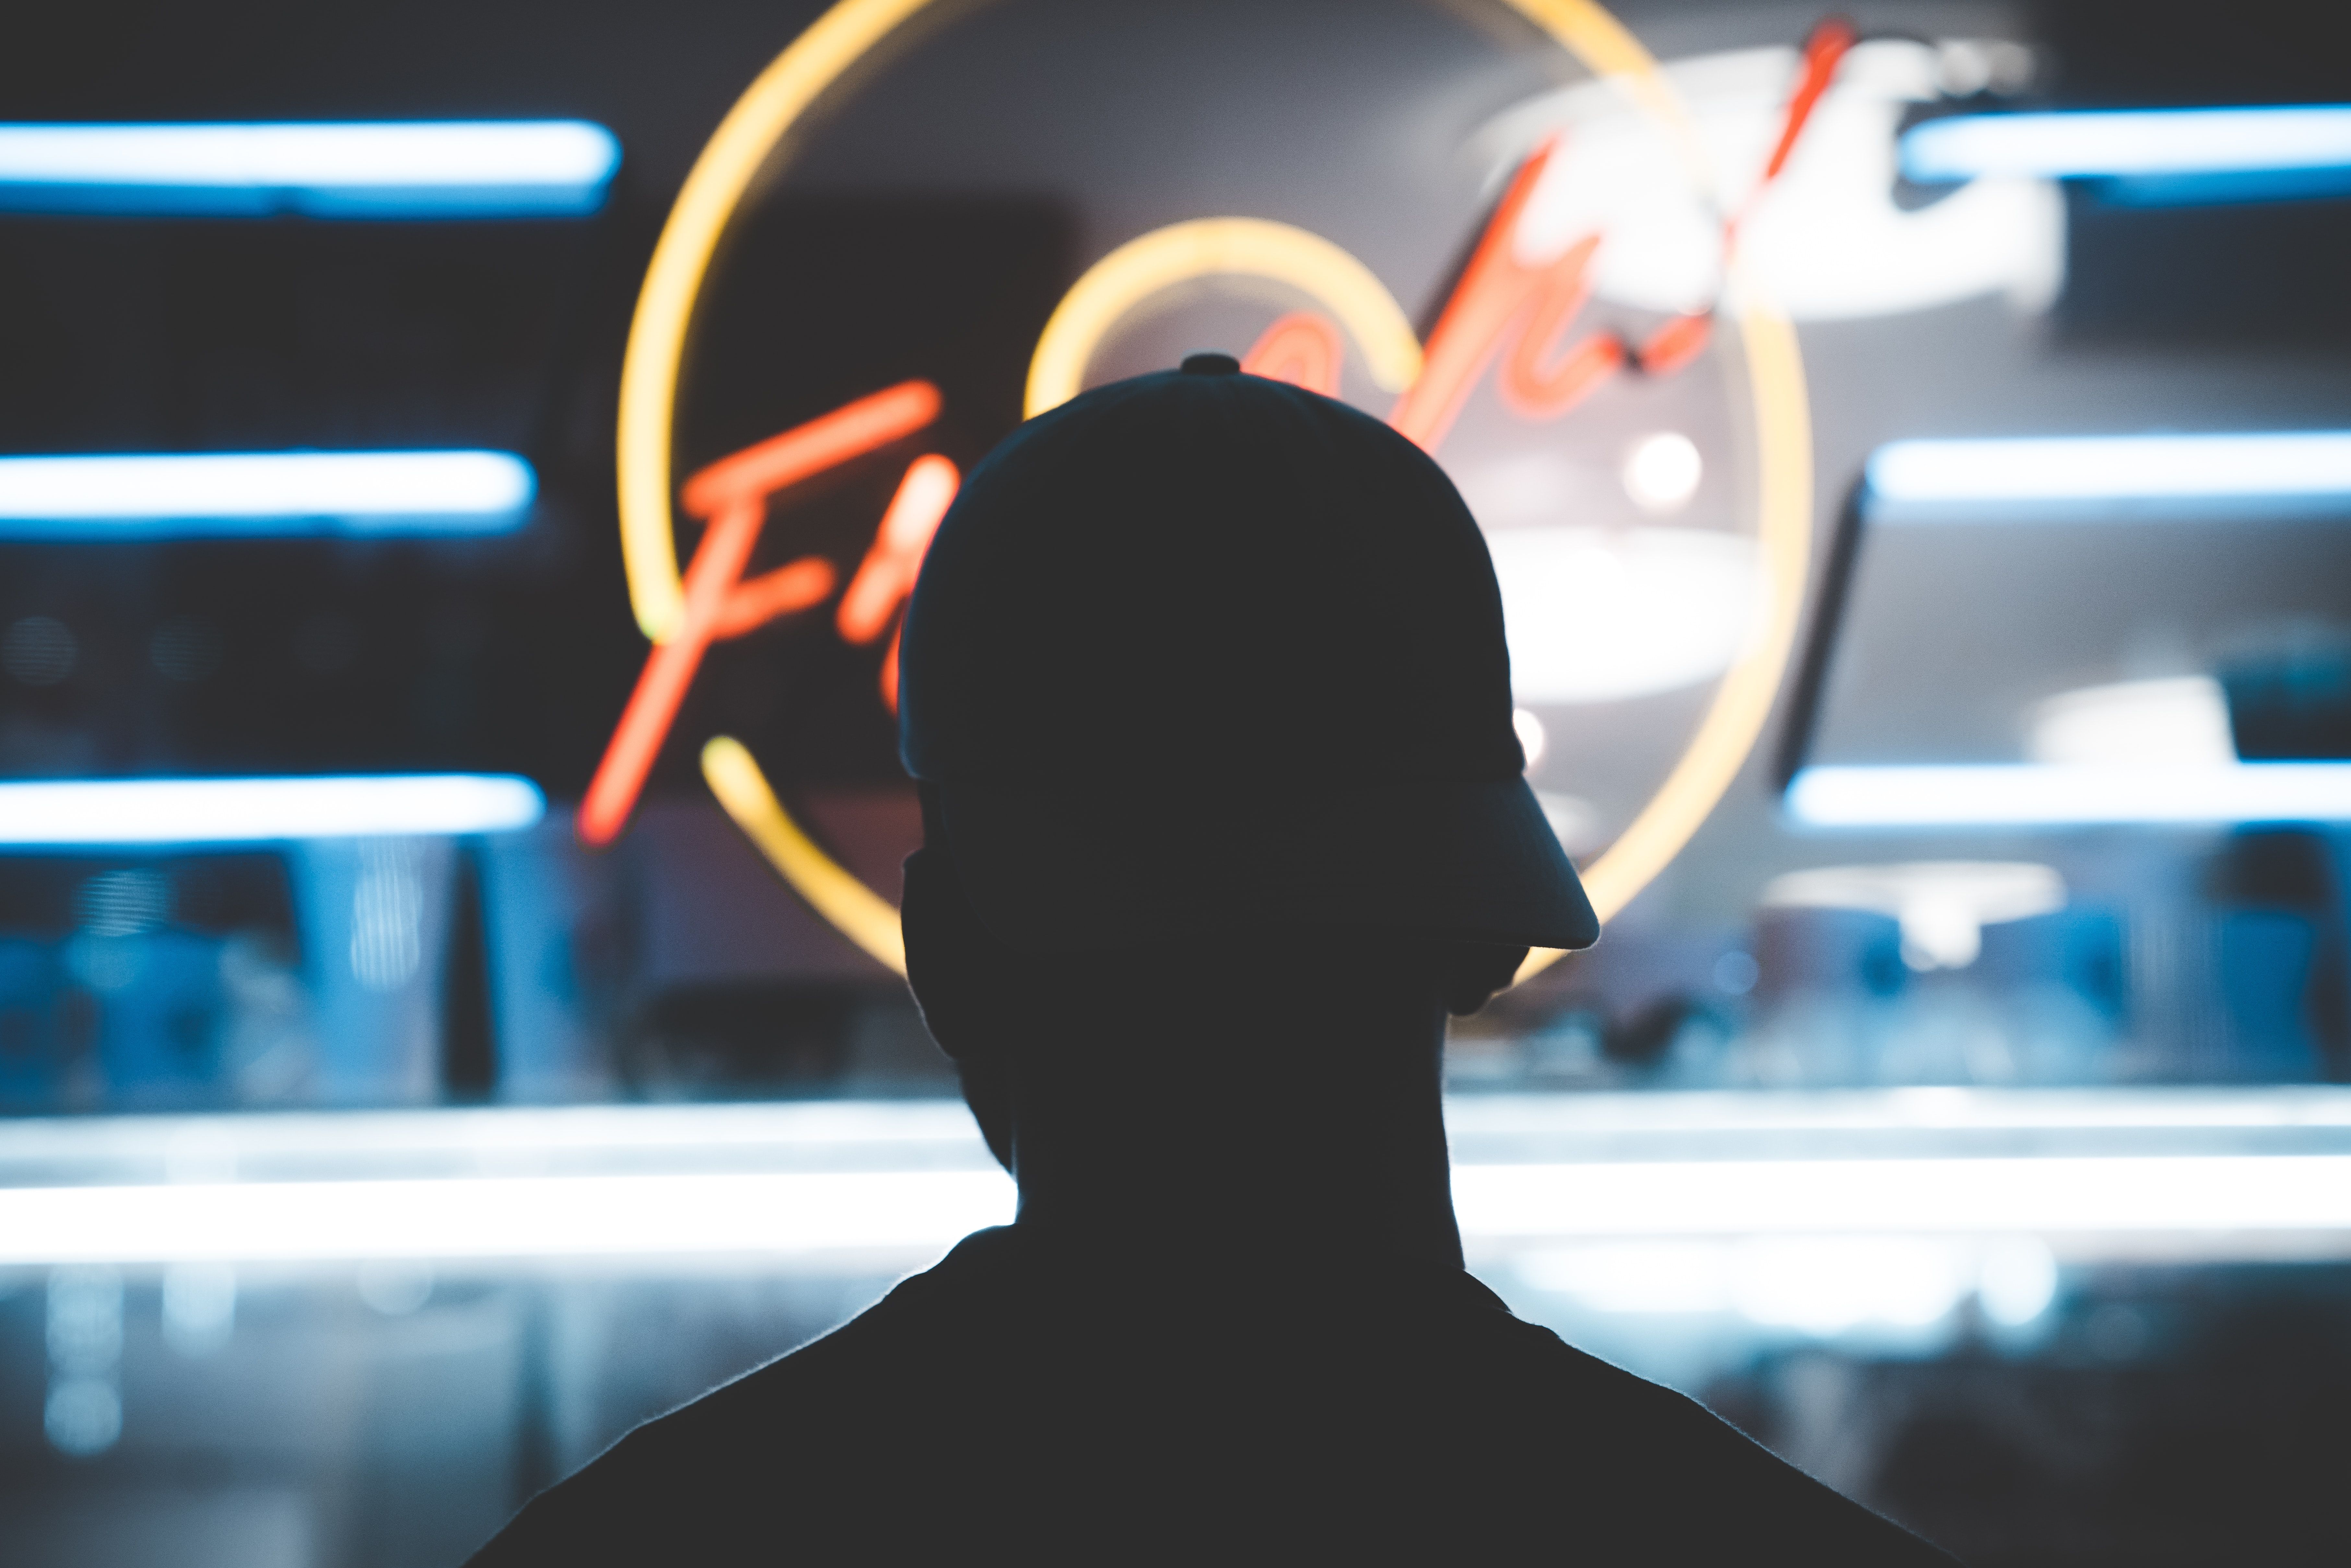 photo of a person in front of a neon sign